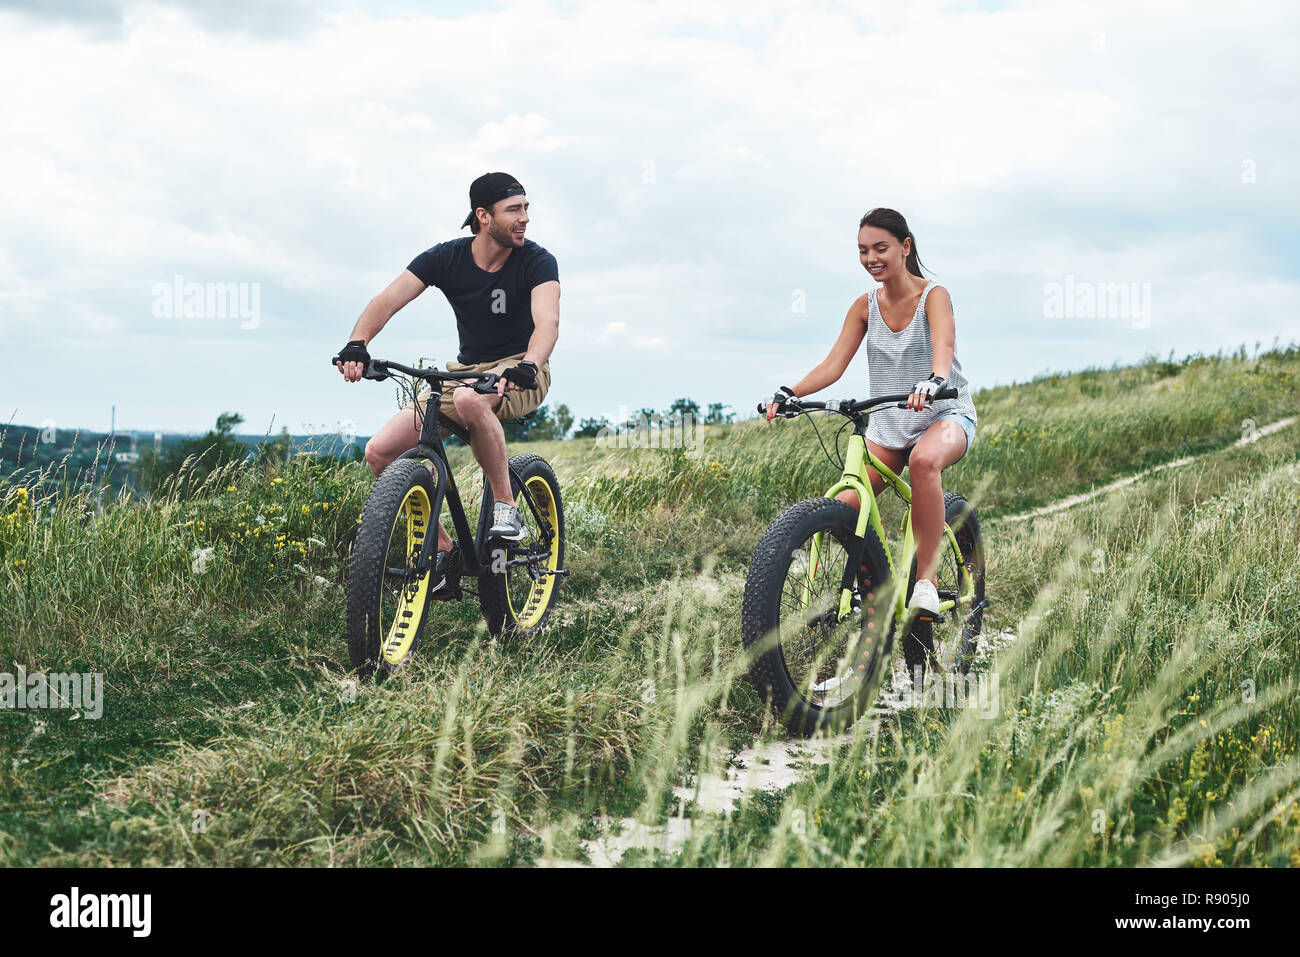 A man and a woman are laughing and riding fatbikes Stock Photo